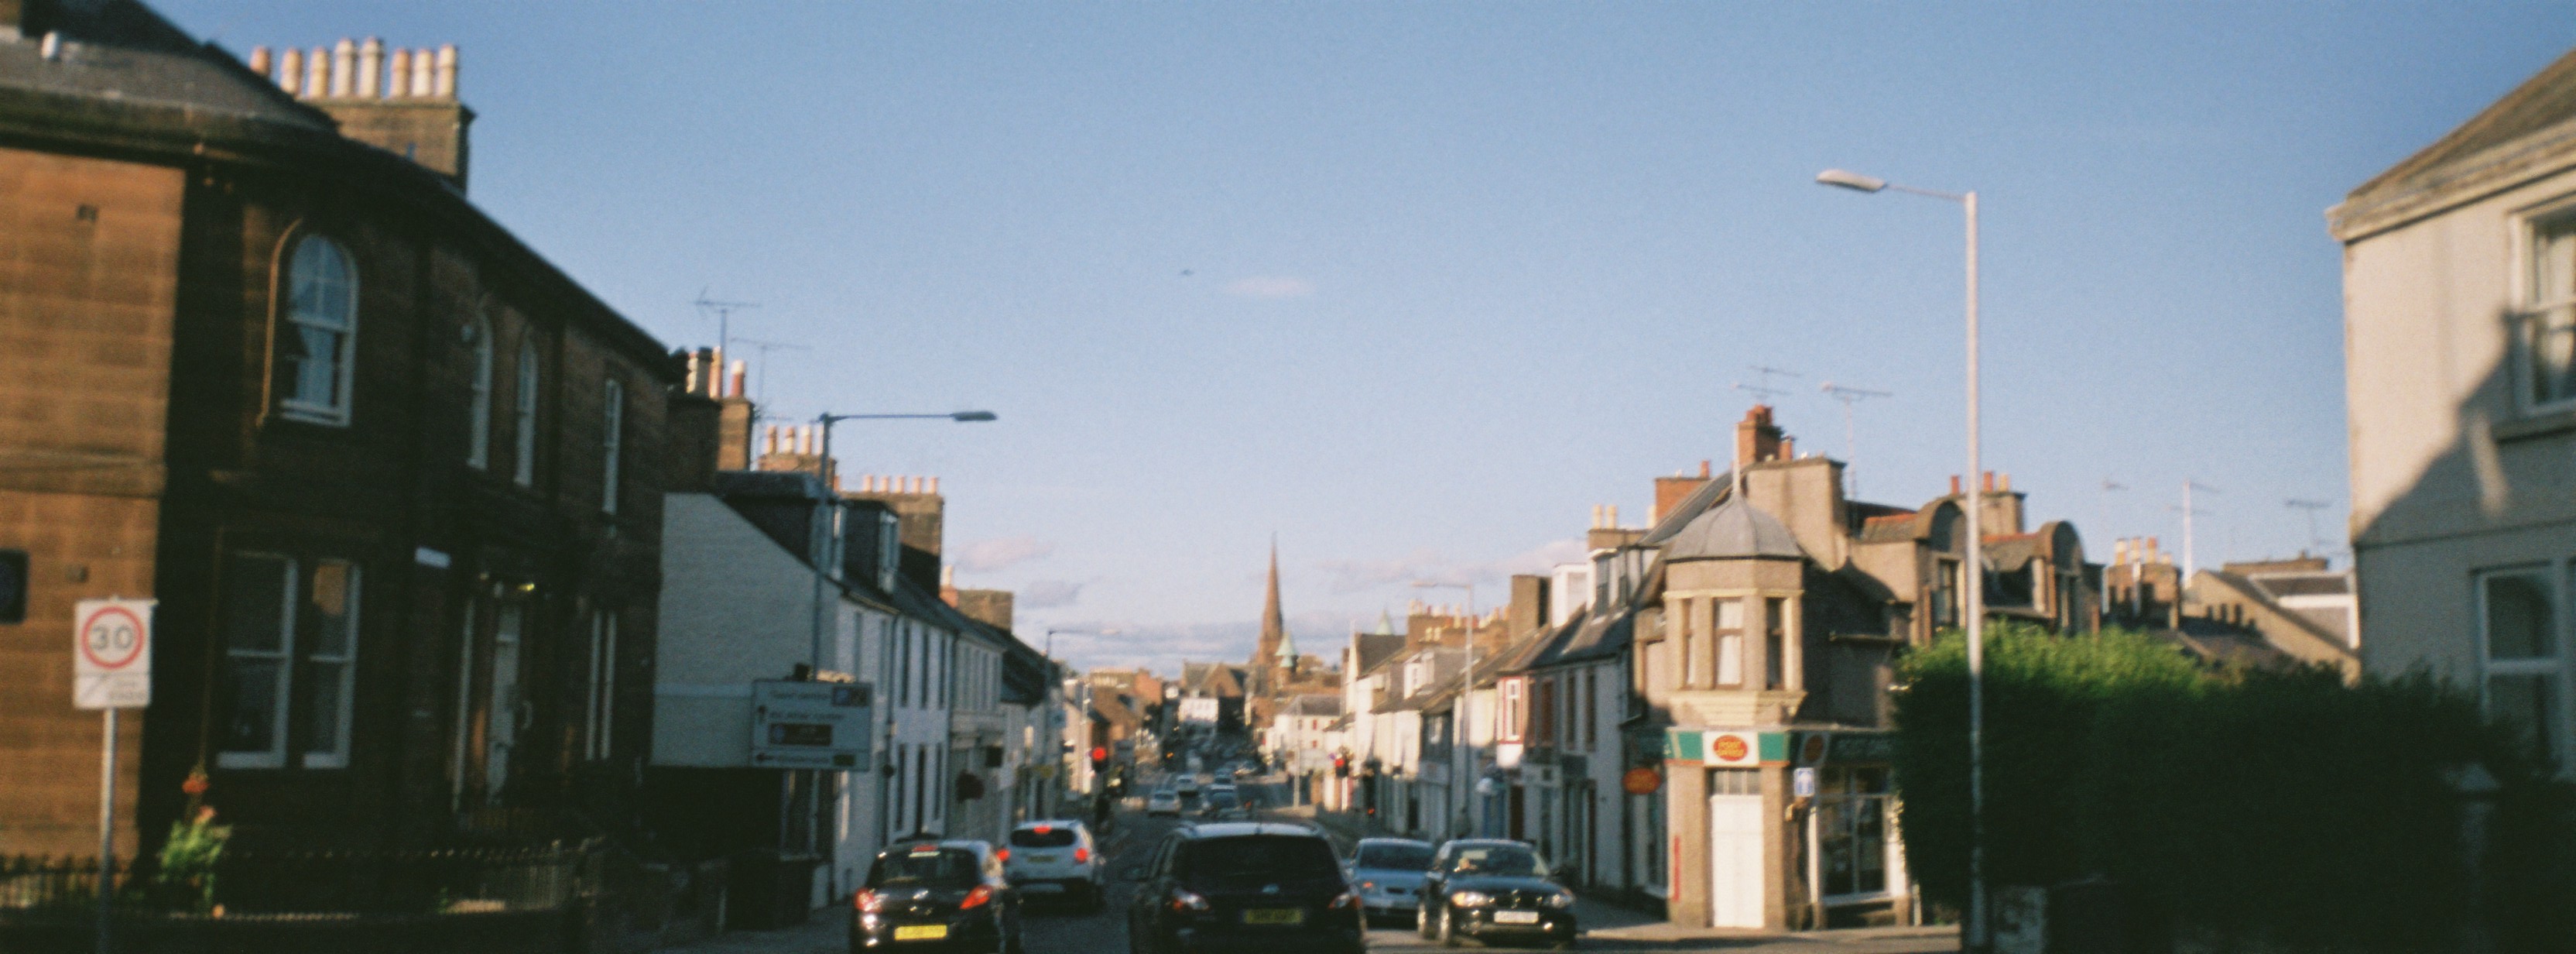 Dumfries 2015. Panorama Wide Pic Camera with Agfaphoto Vista Plus 200